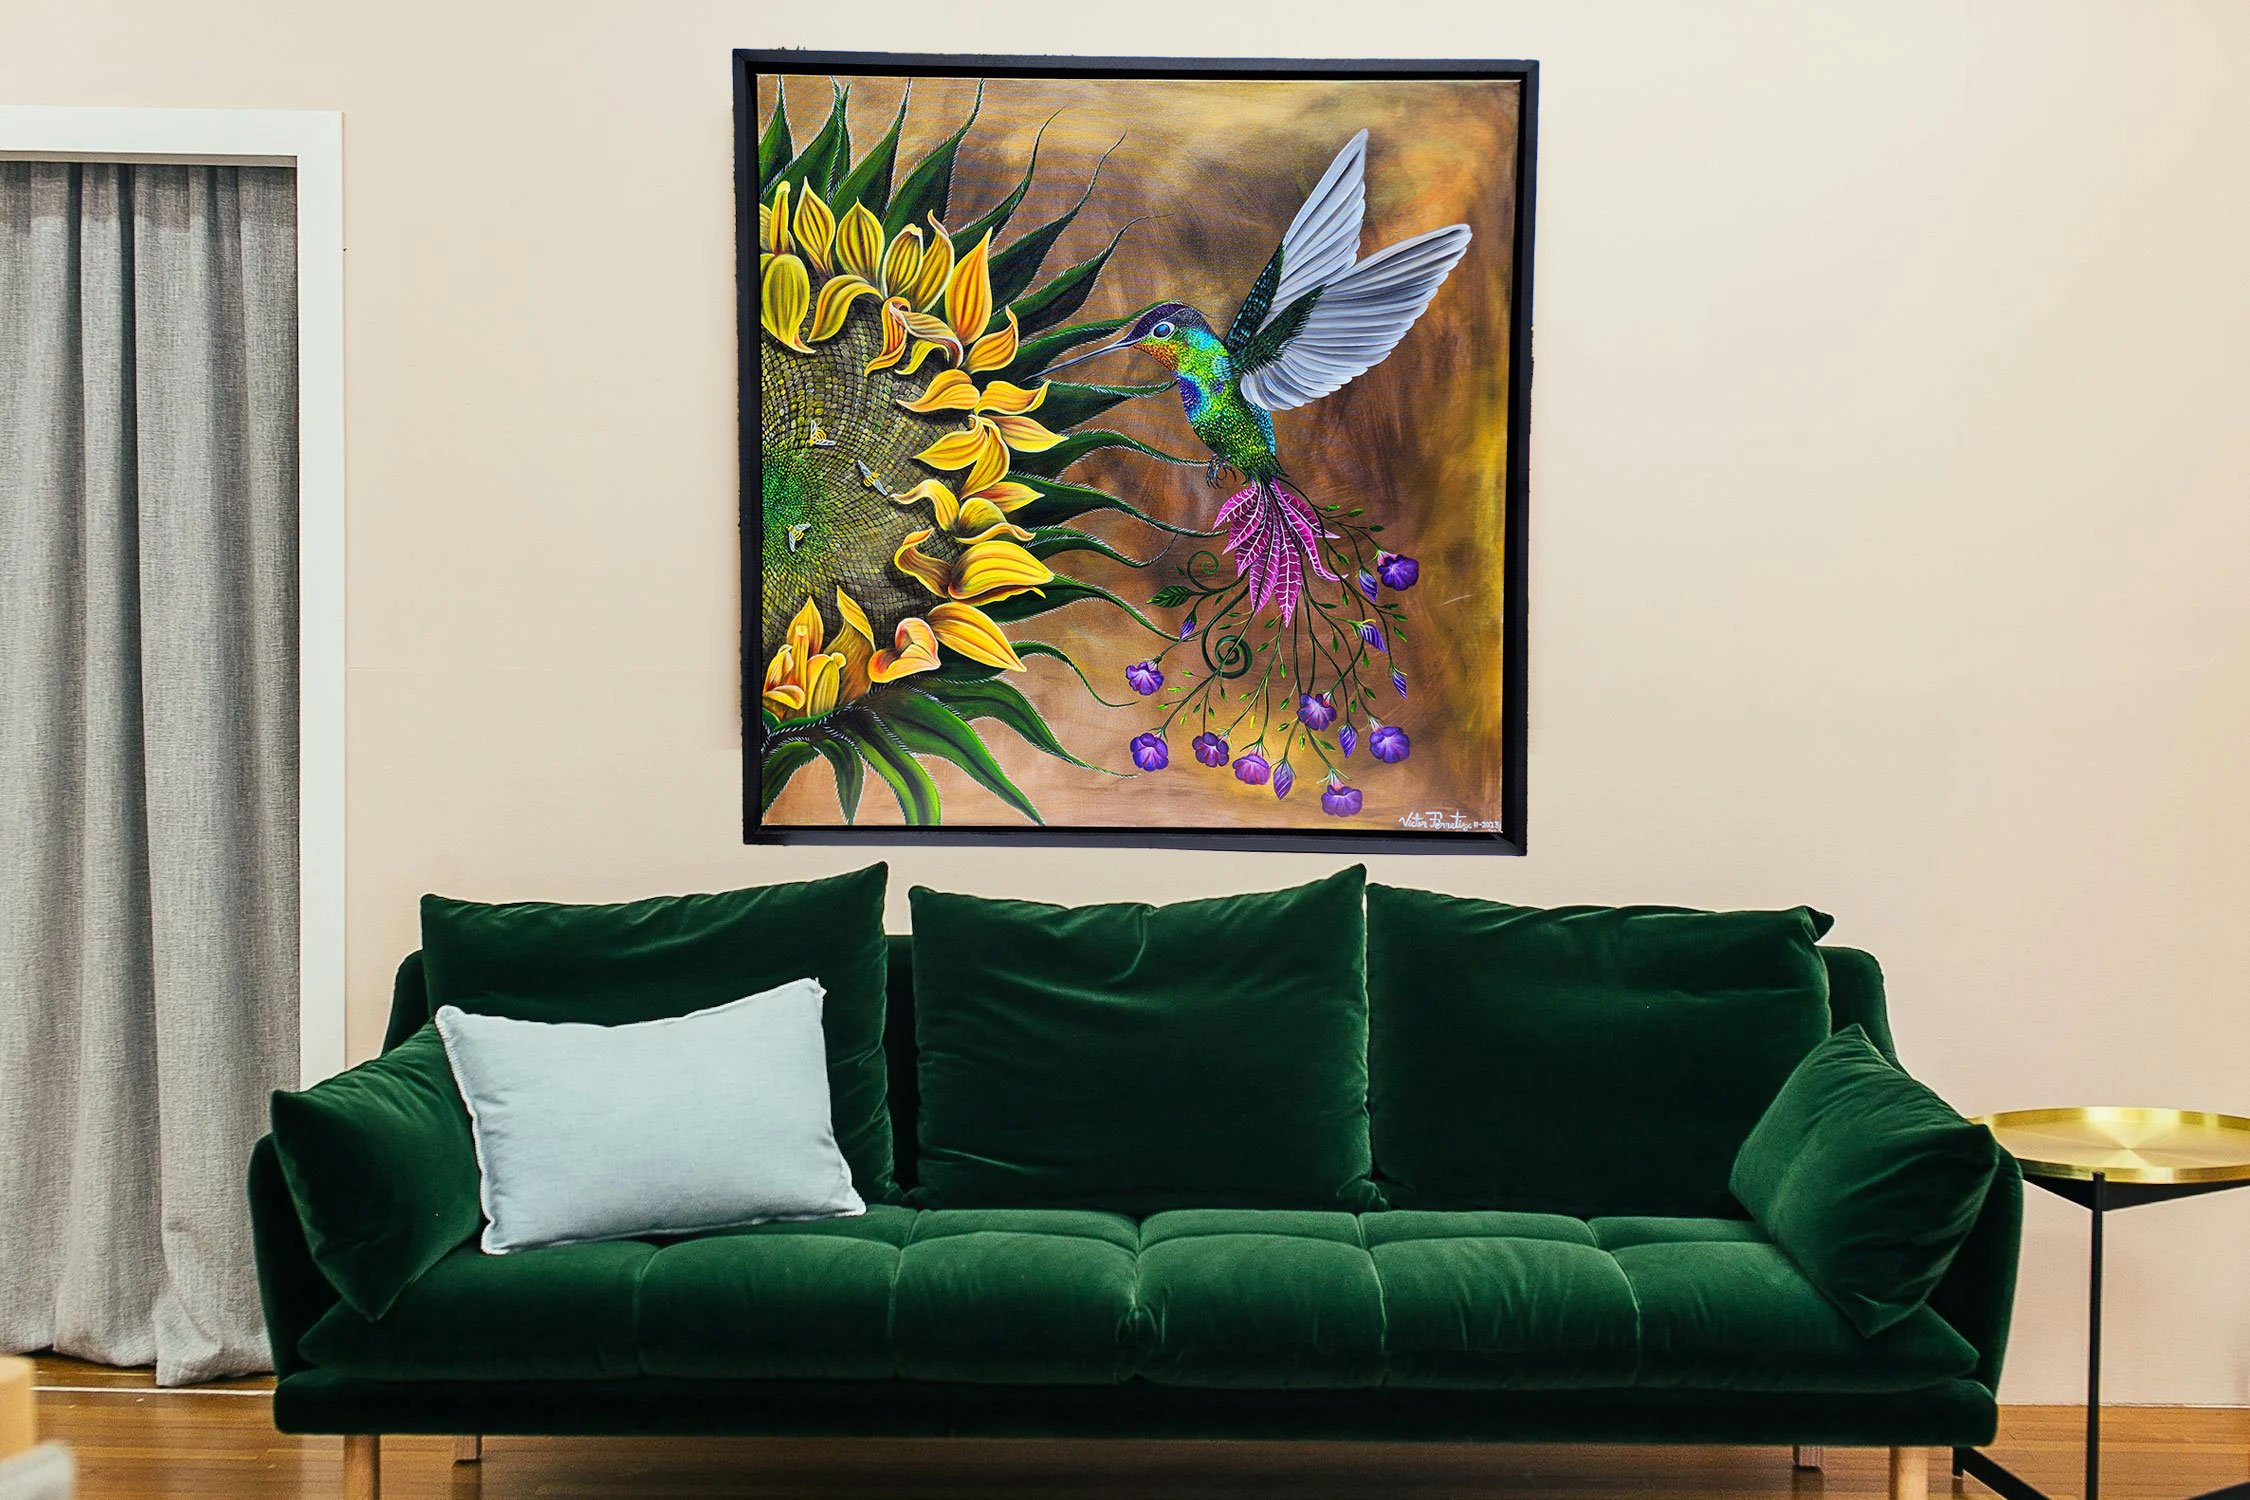 Original painting with a giant sunflower with a big hummingbird metamorphosing into magenta morning glories. A deep look into nature, perceiving bright and rich colors. Dimensions: 1.5″x48″x48 The work of art has a custom frame handmade with completely resistant, strong poplar wood and is already painted with a uniform black color. The frame already has some D-shaped hooks assembled, ready to hang in your beautiful home.